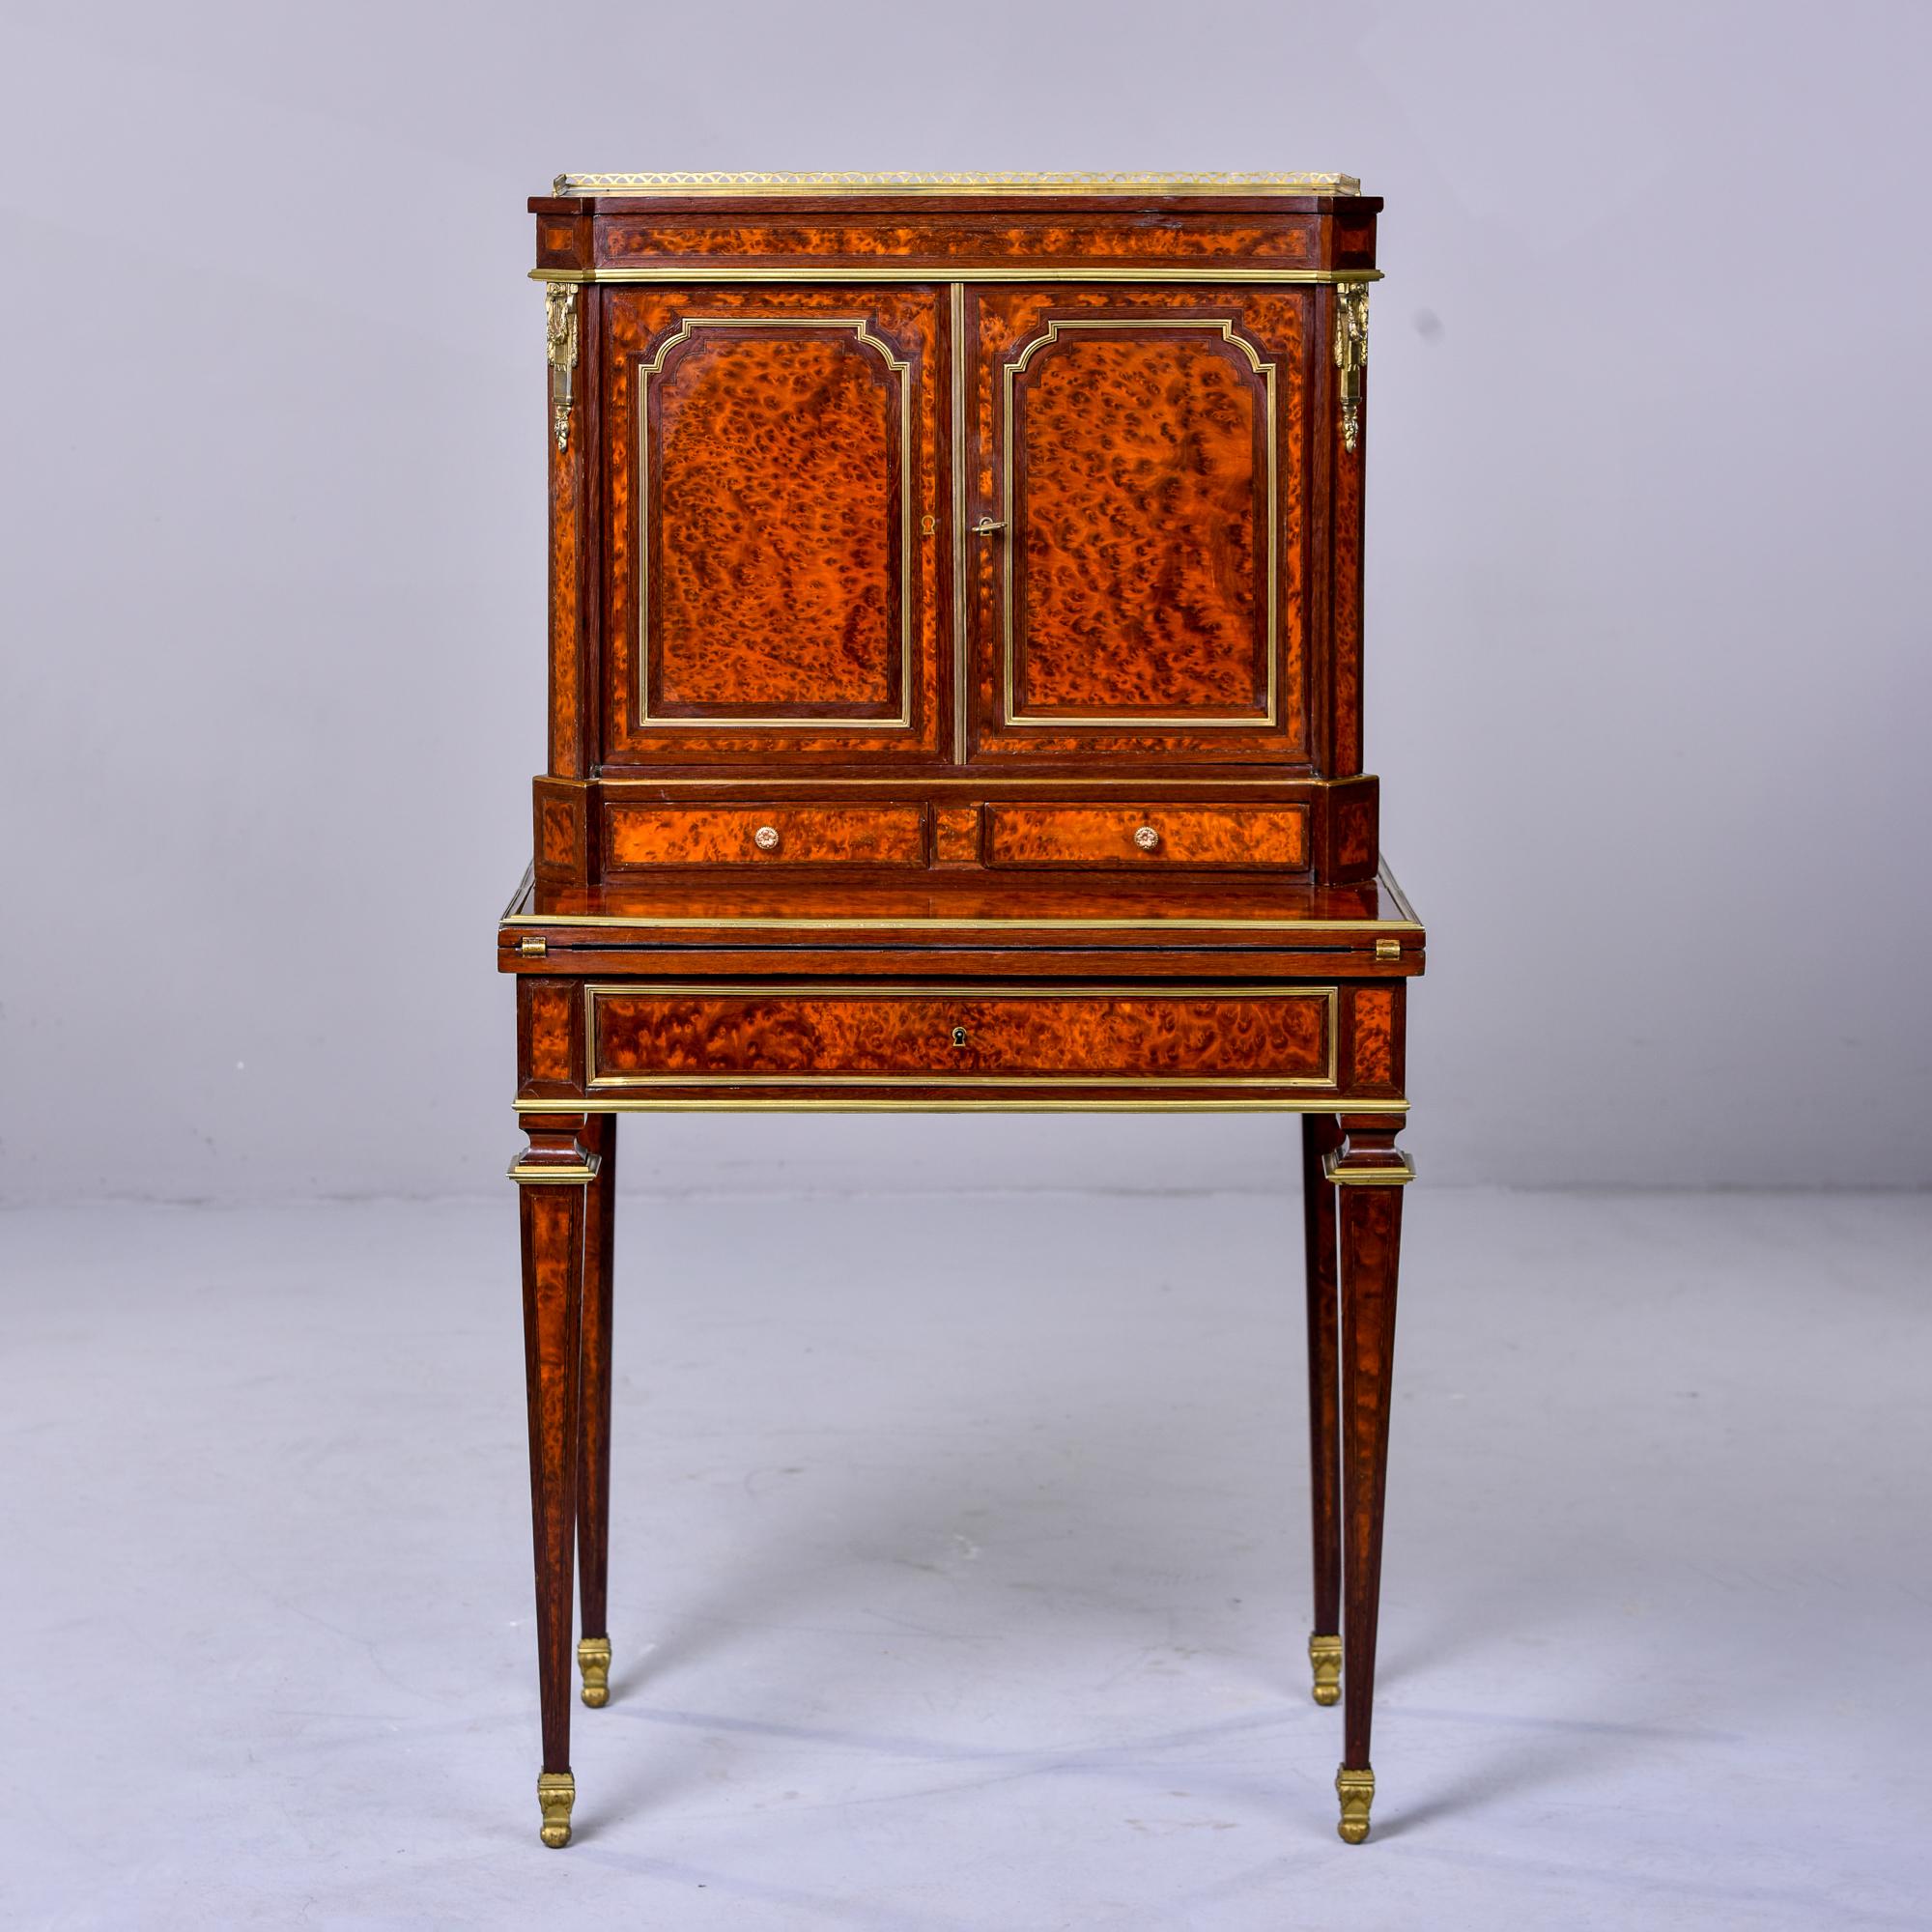 Circa 1890s French secretary desk or bonheur du jour (translates to daytime delight) in mahogany and brass. Top section has a brass gallery, decorative brass trim and mounts. Two hinged locking doors open to storage space with a single fixed shelf.